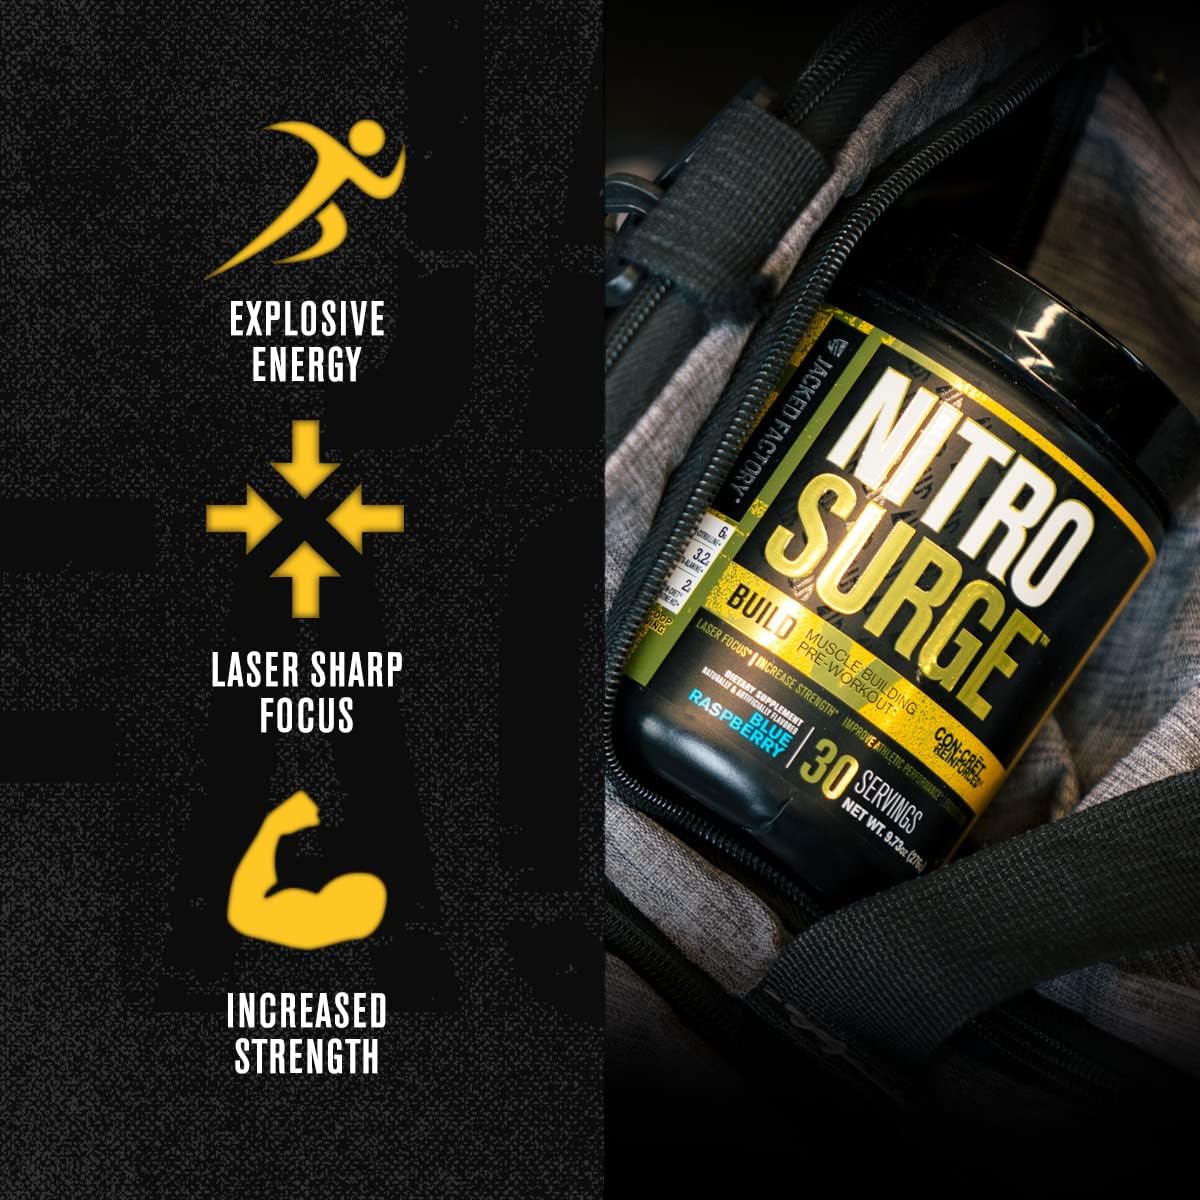 Jacked Factory NITROSURGE Build Pre Workout with Creatine for Muscle Building 30 Servicios